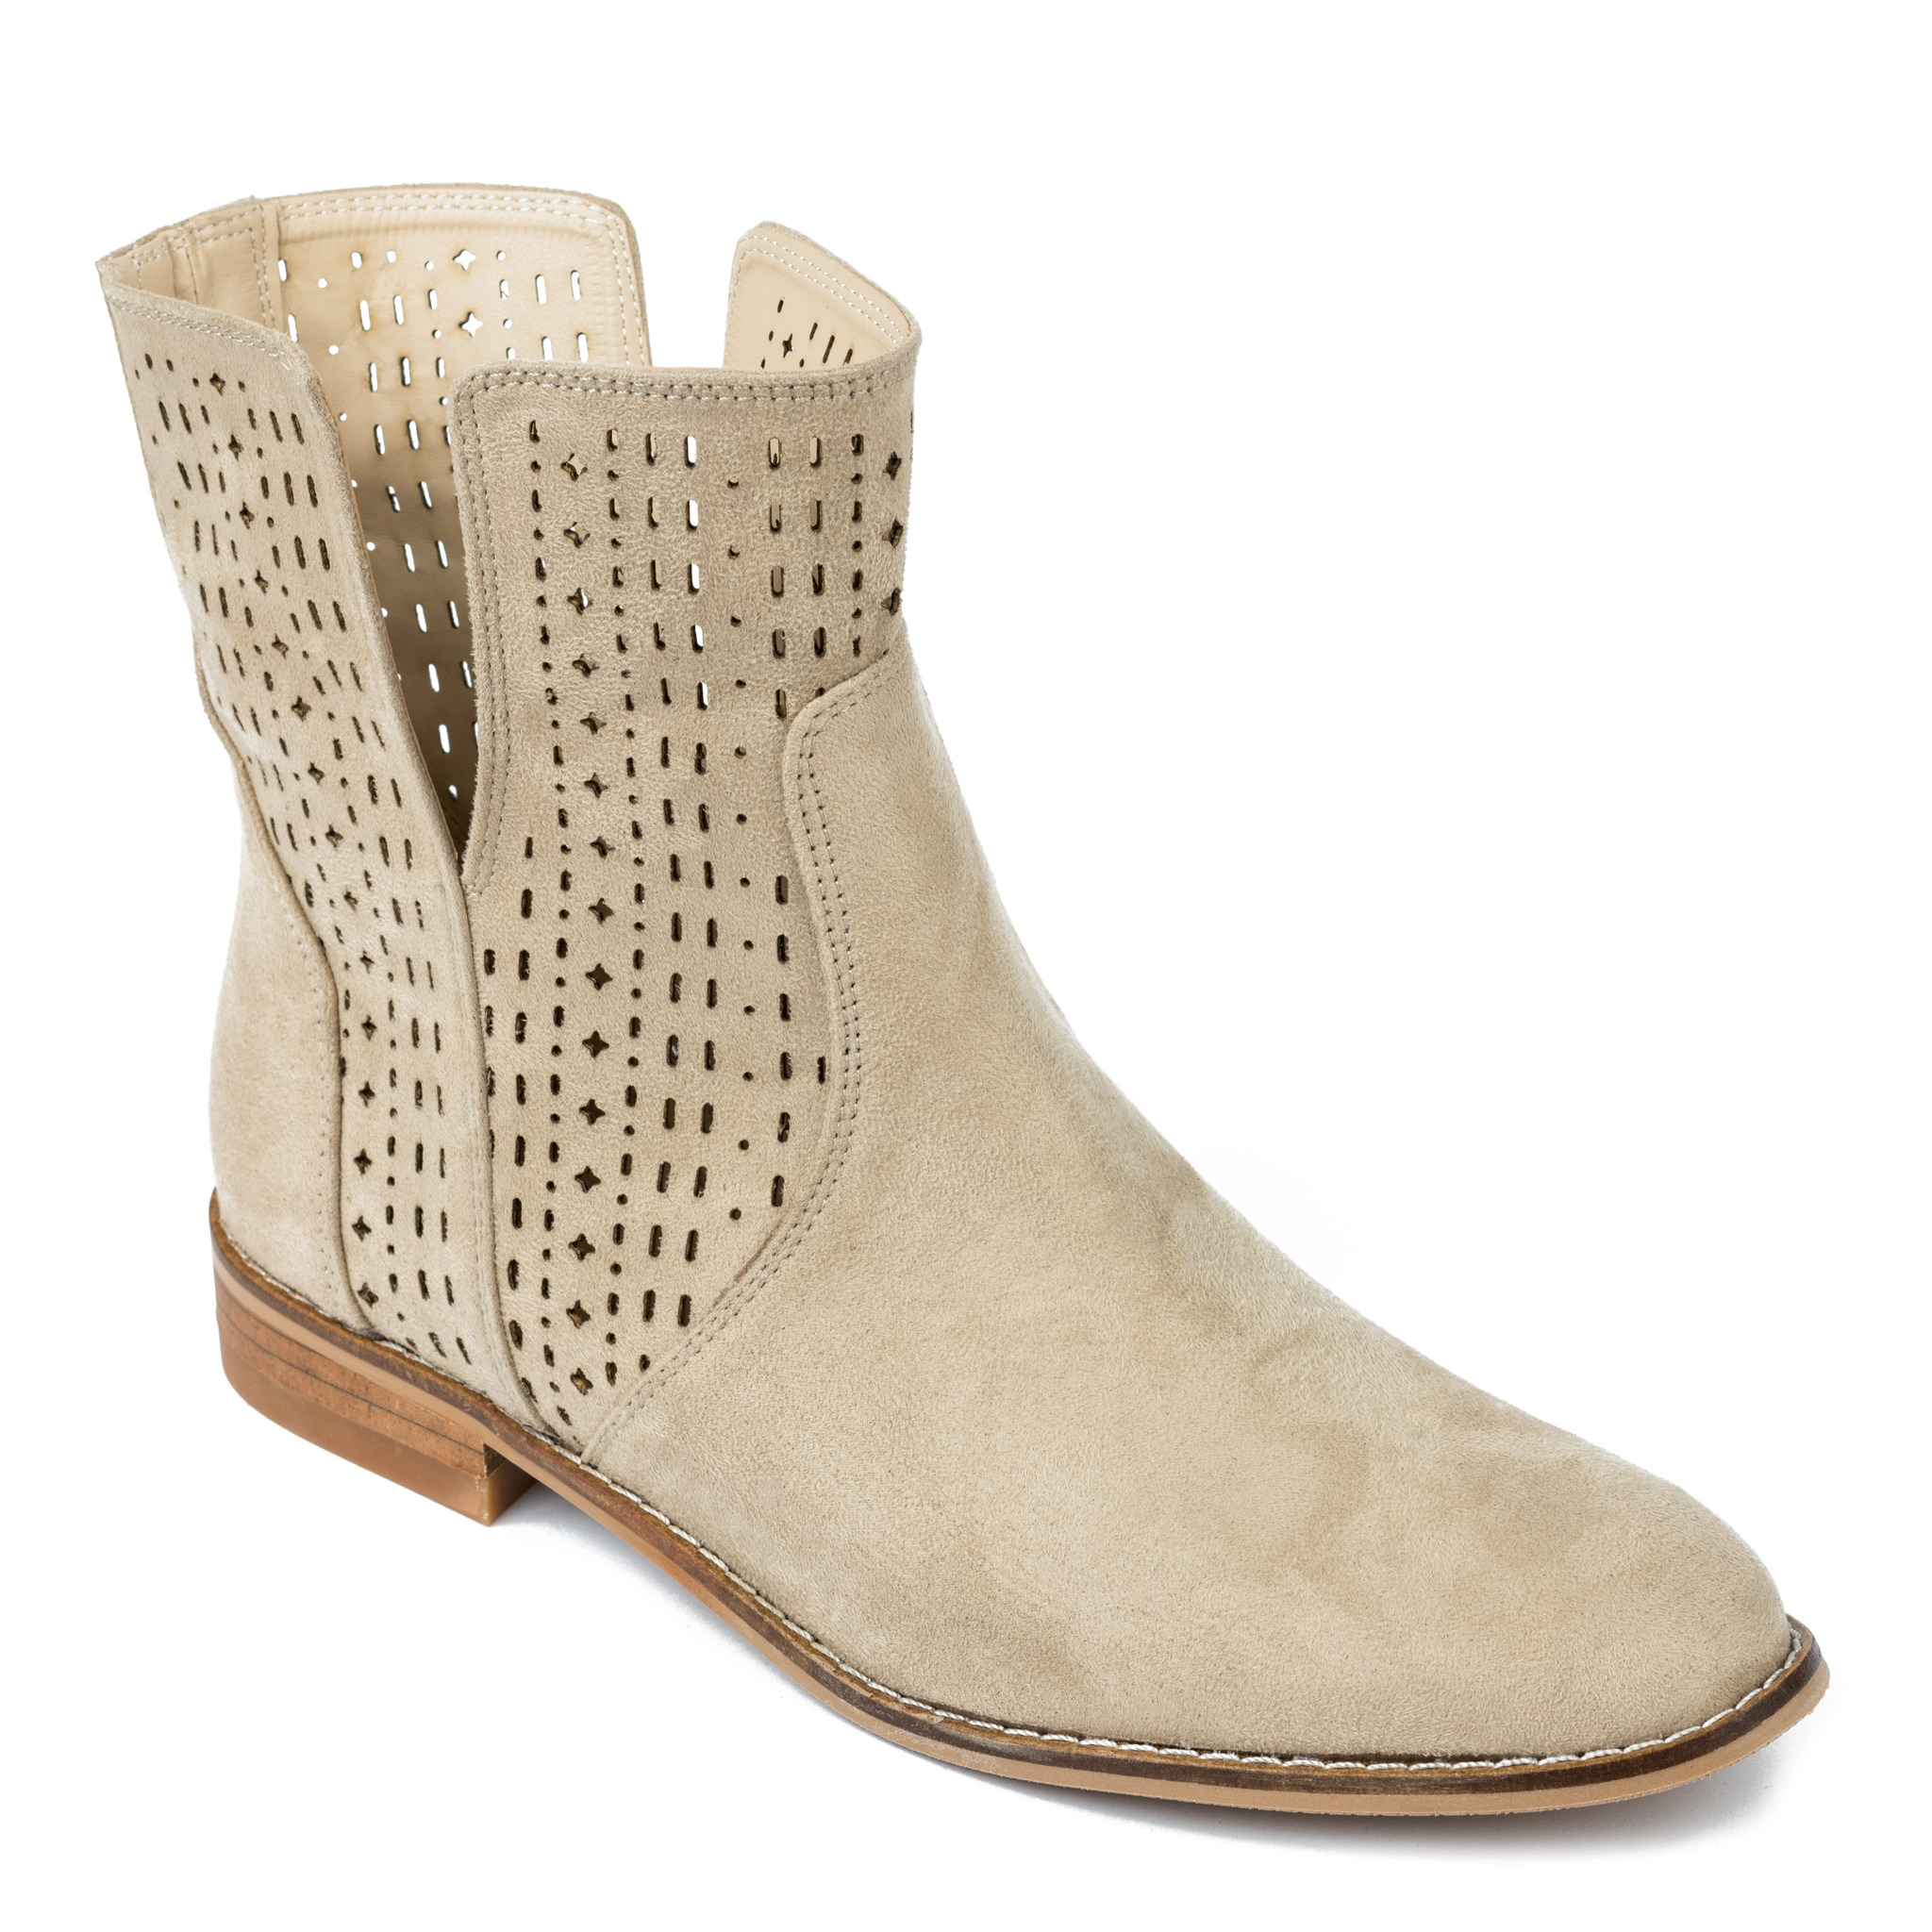 HOLLOW ANKLE BOOTS - BEIGE